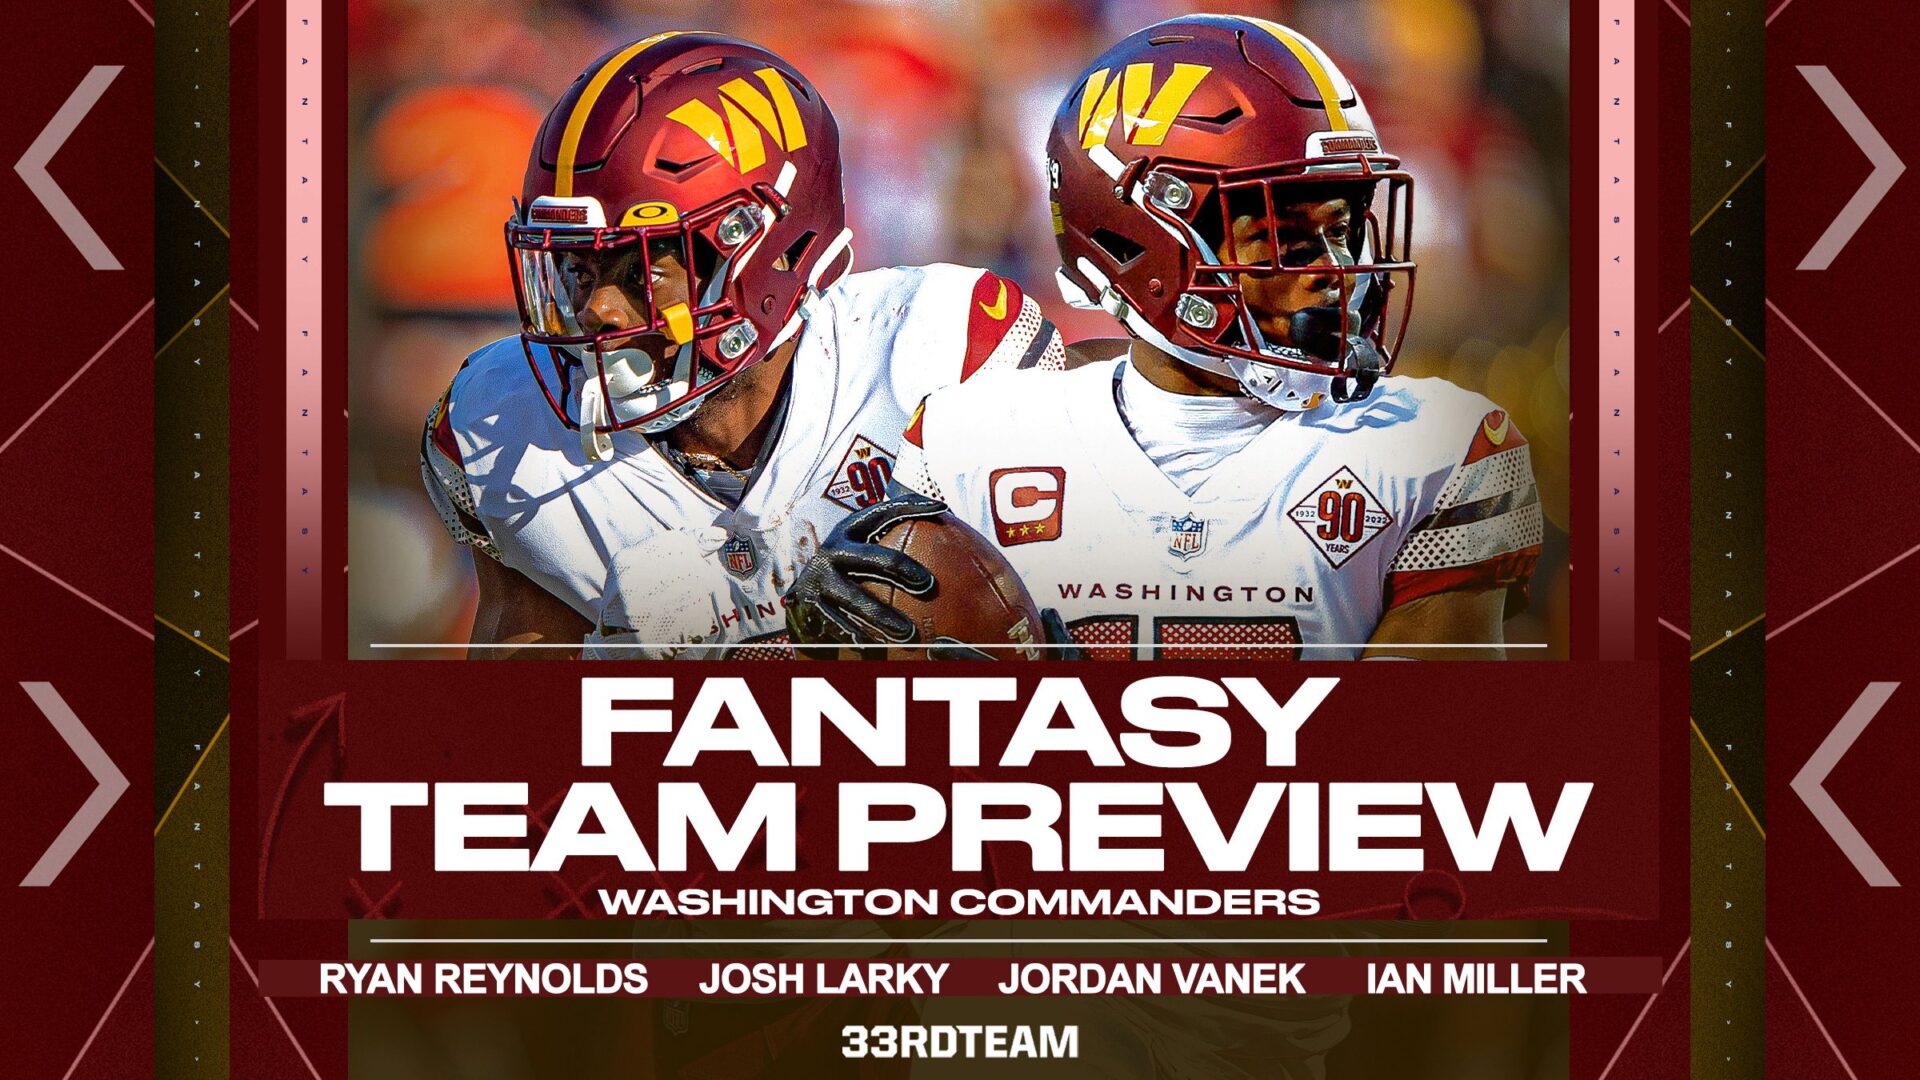 Maroon-and-gold image background with the words "Fantasy Team Preview" for the Washington Commanders